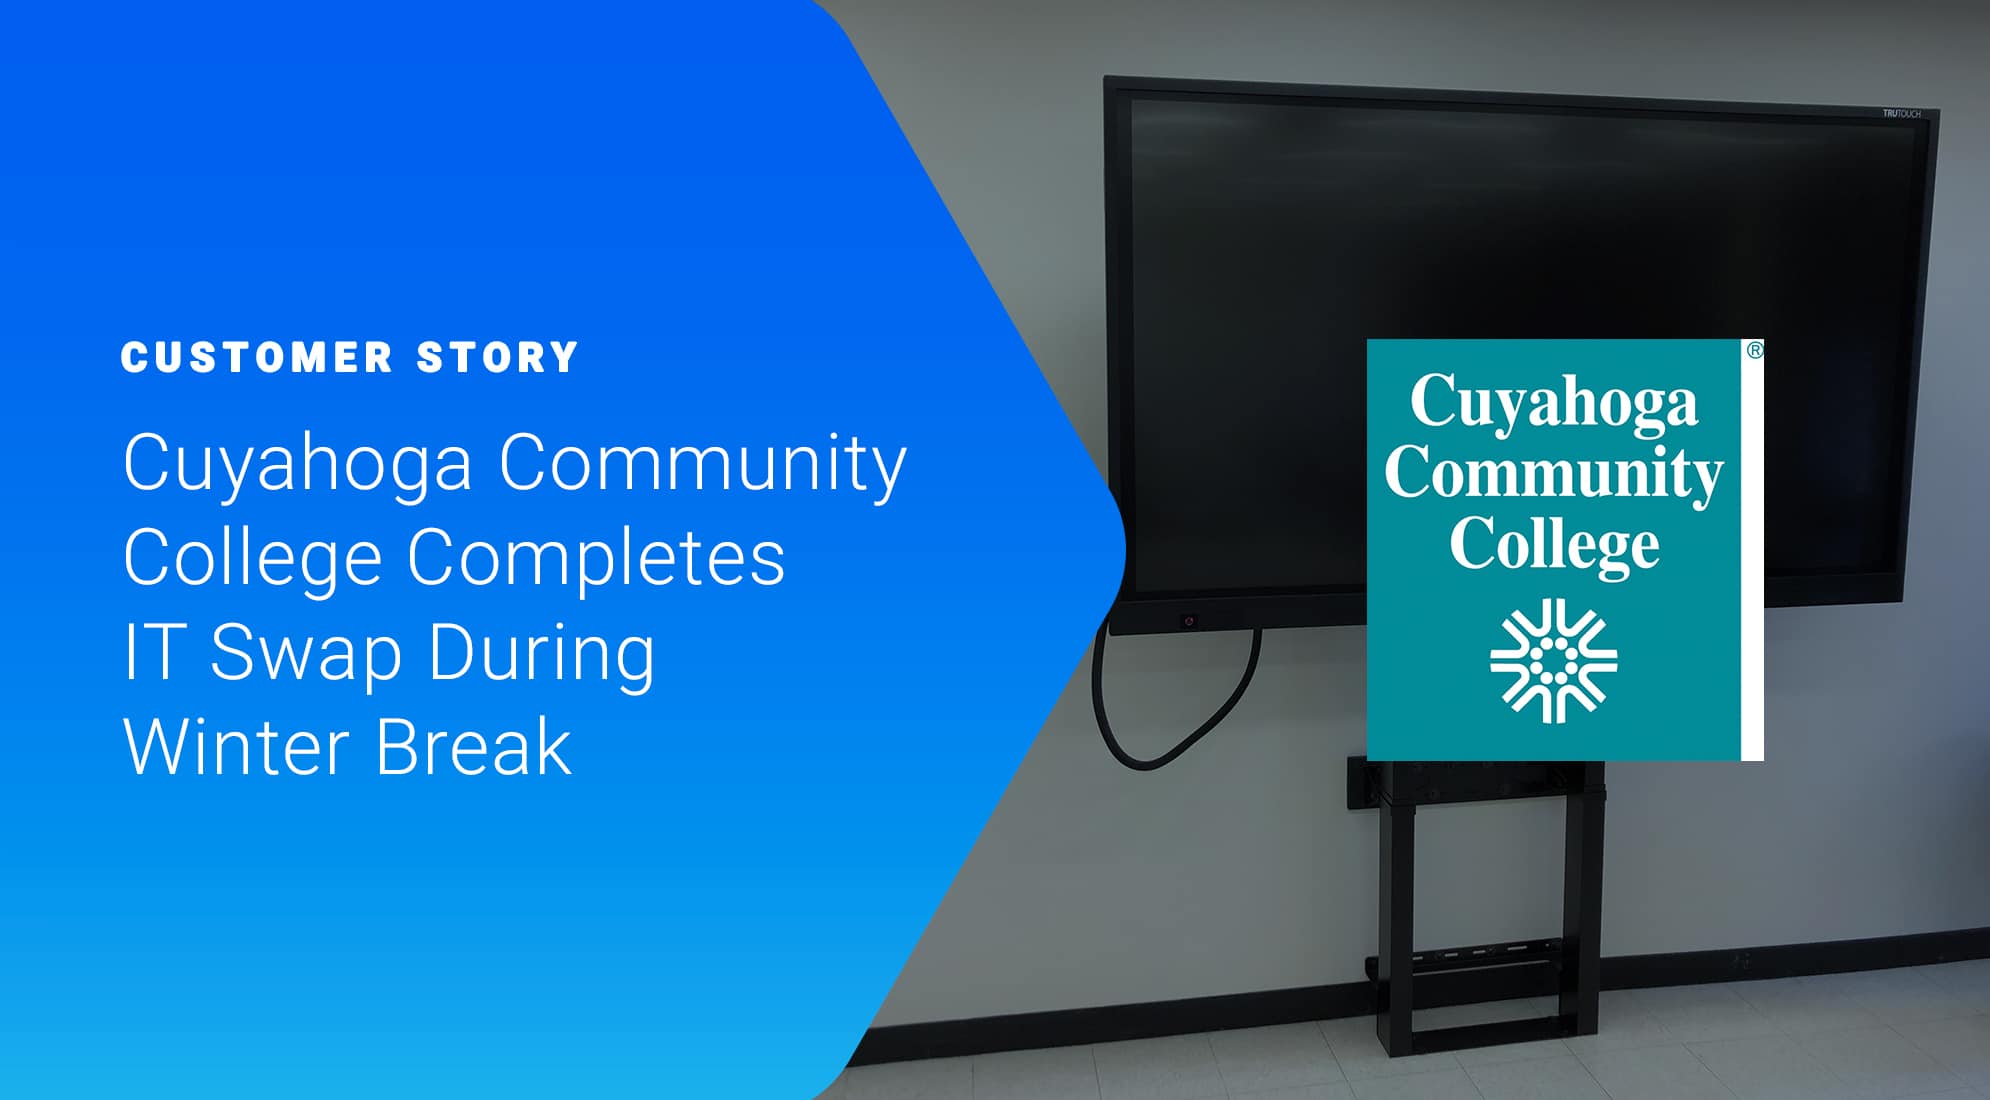 Cuyahoga Community College Completes Classroom Upgrades During Winter Break 2